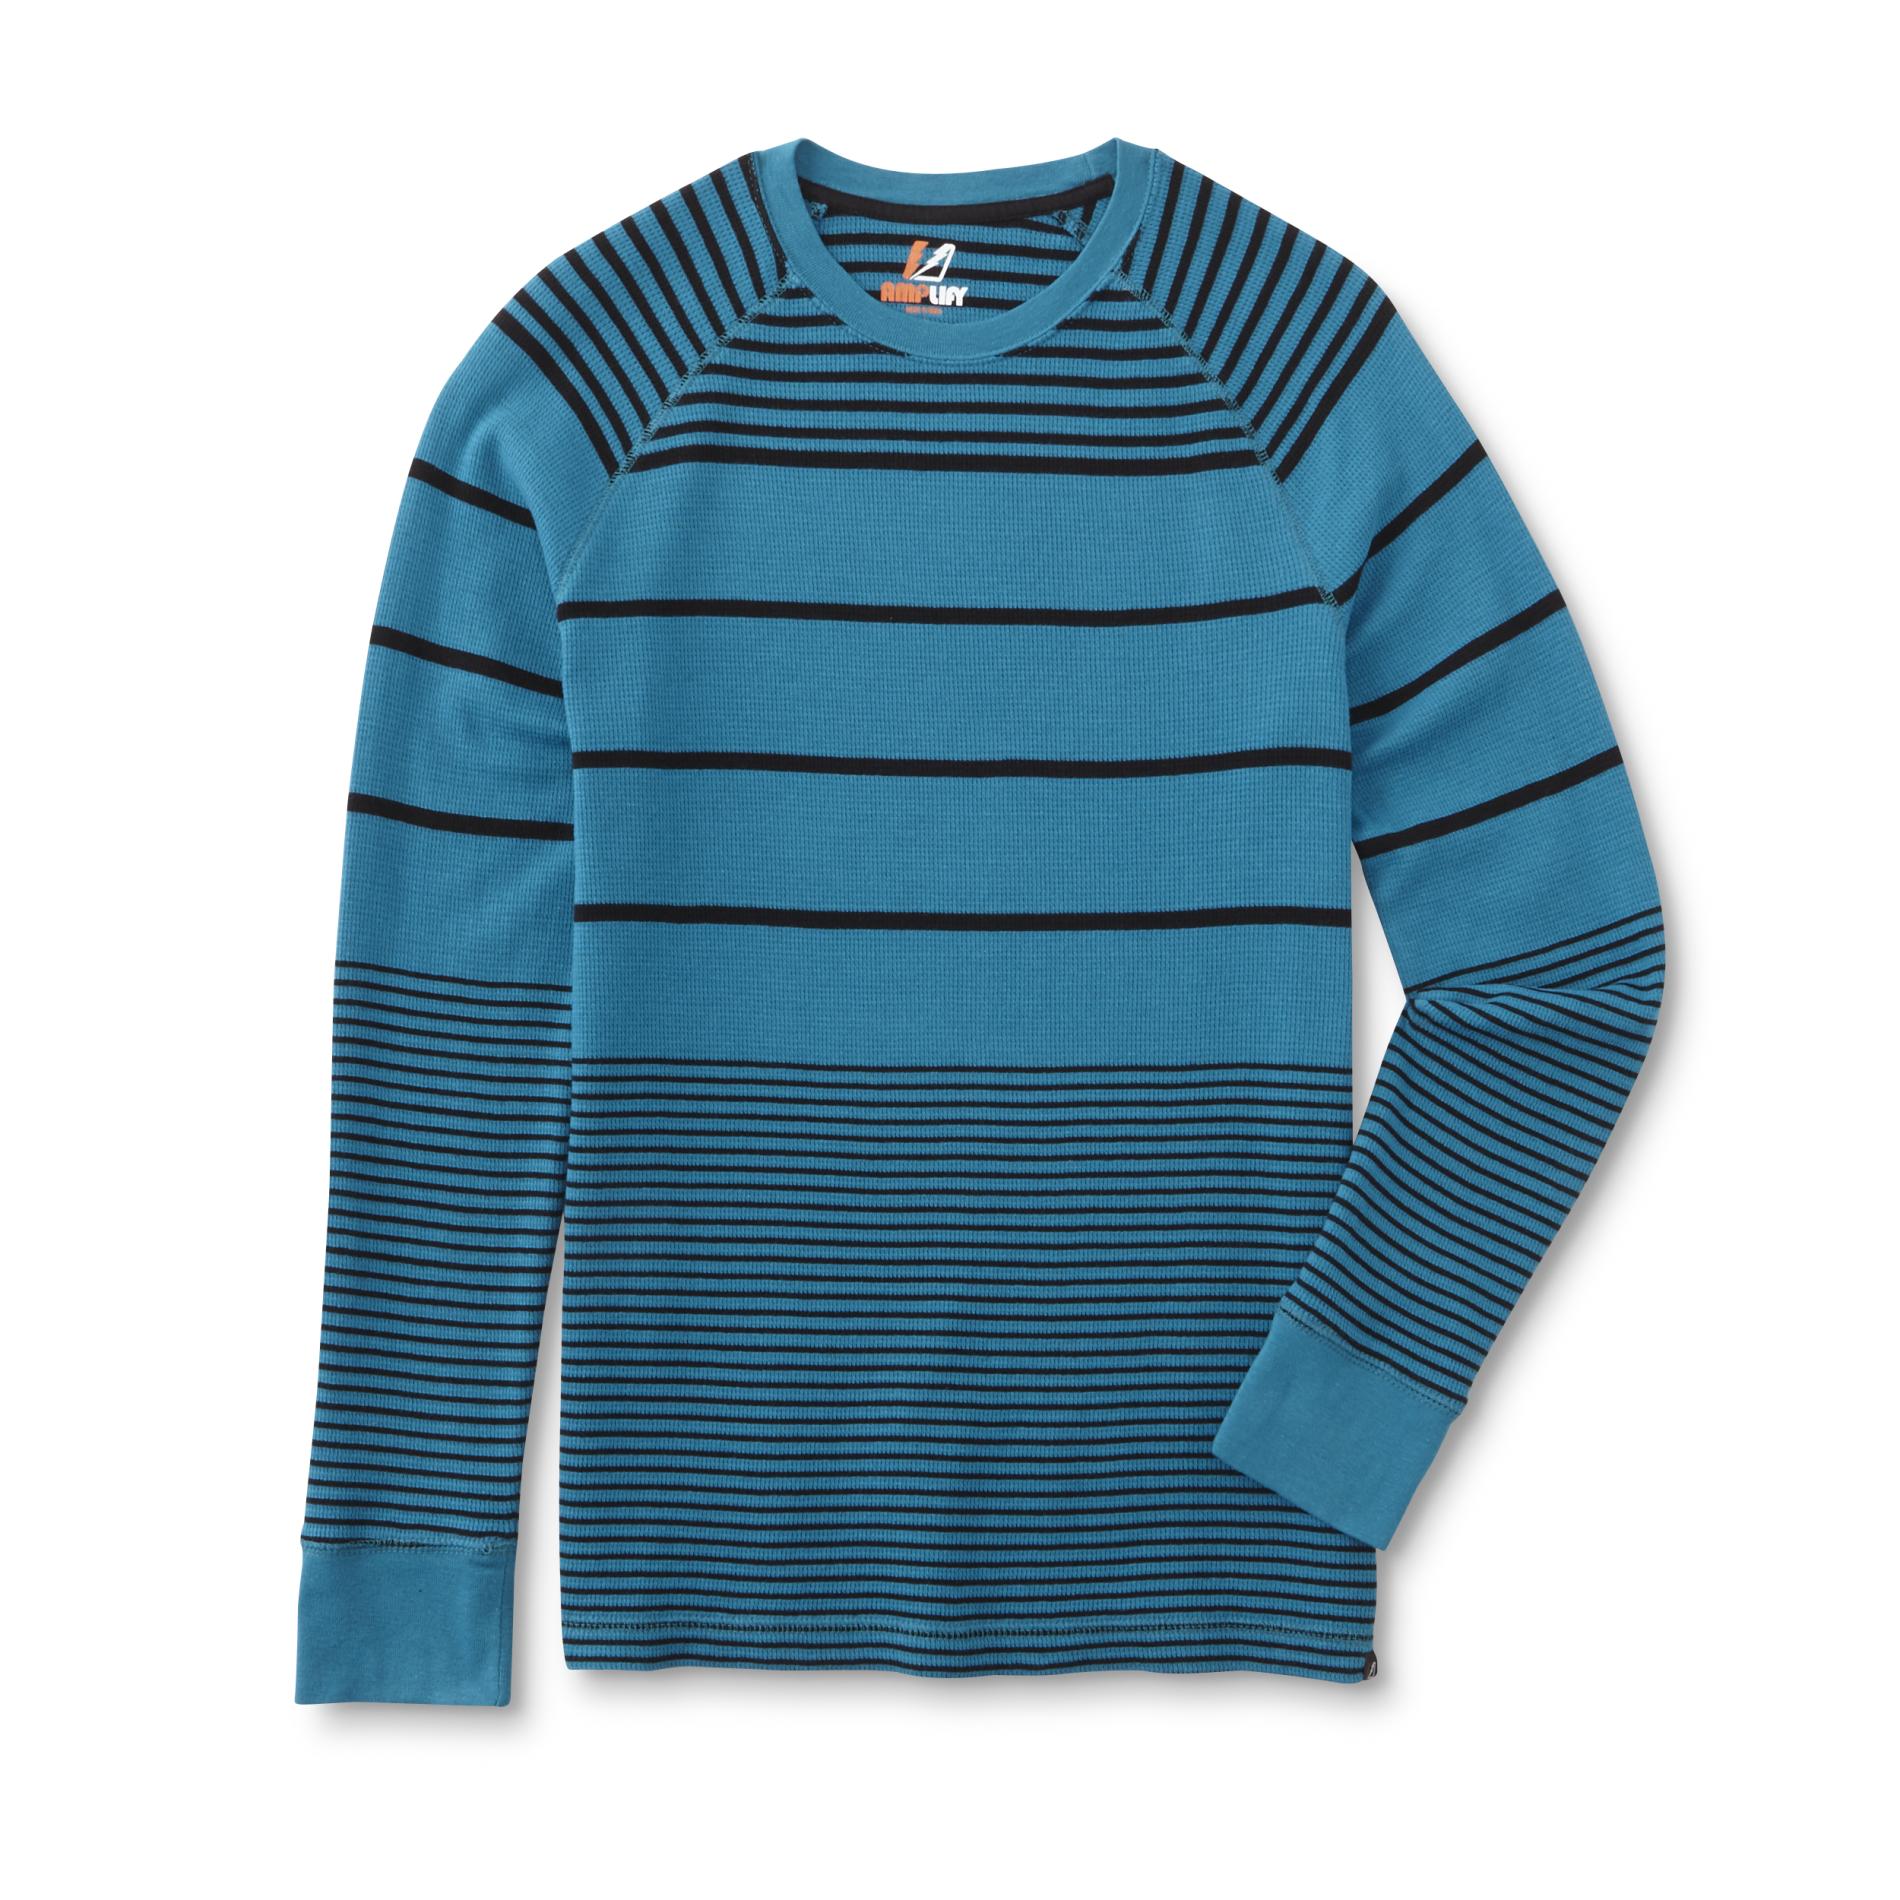 Amplify Young Men's Thermal Shirt - Striped